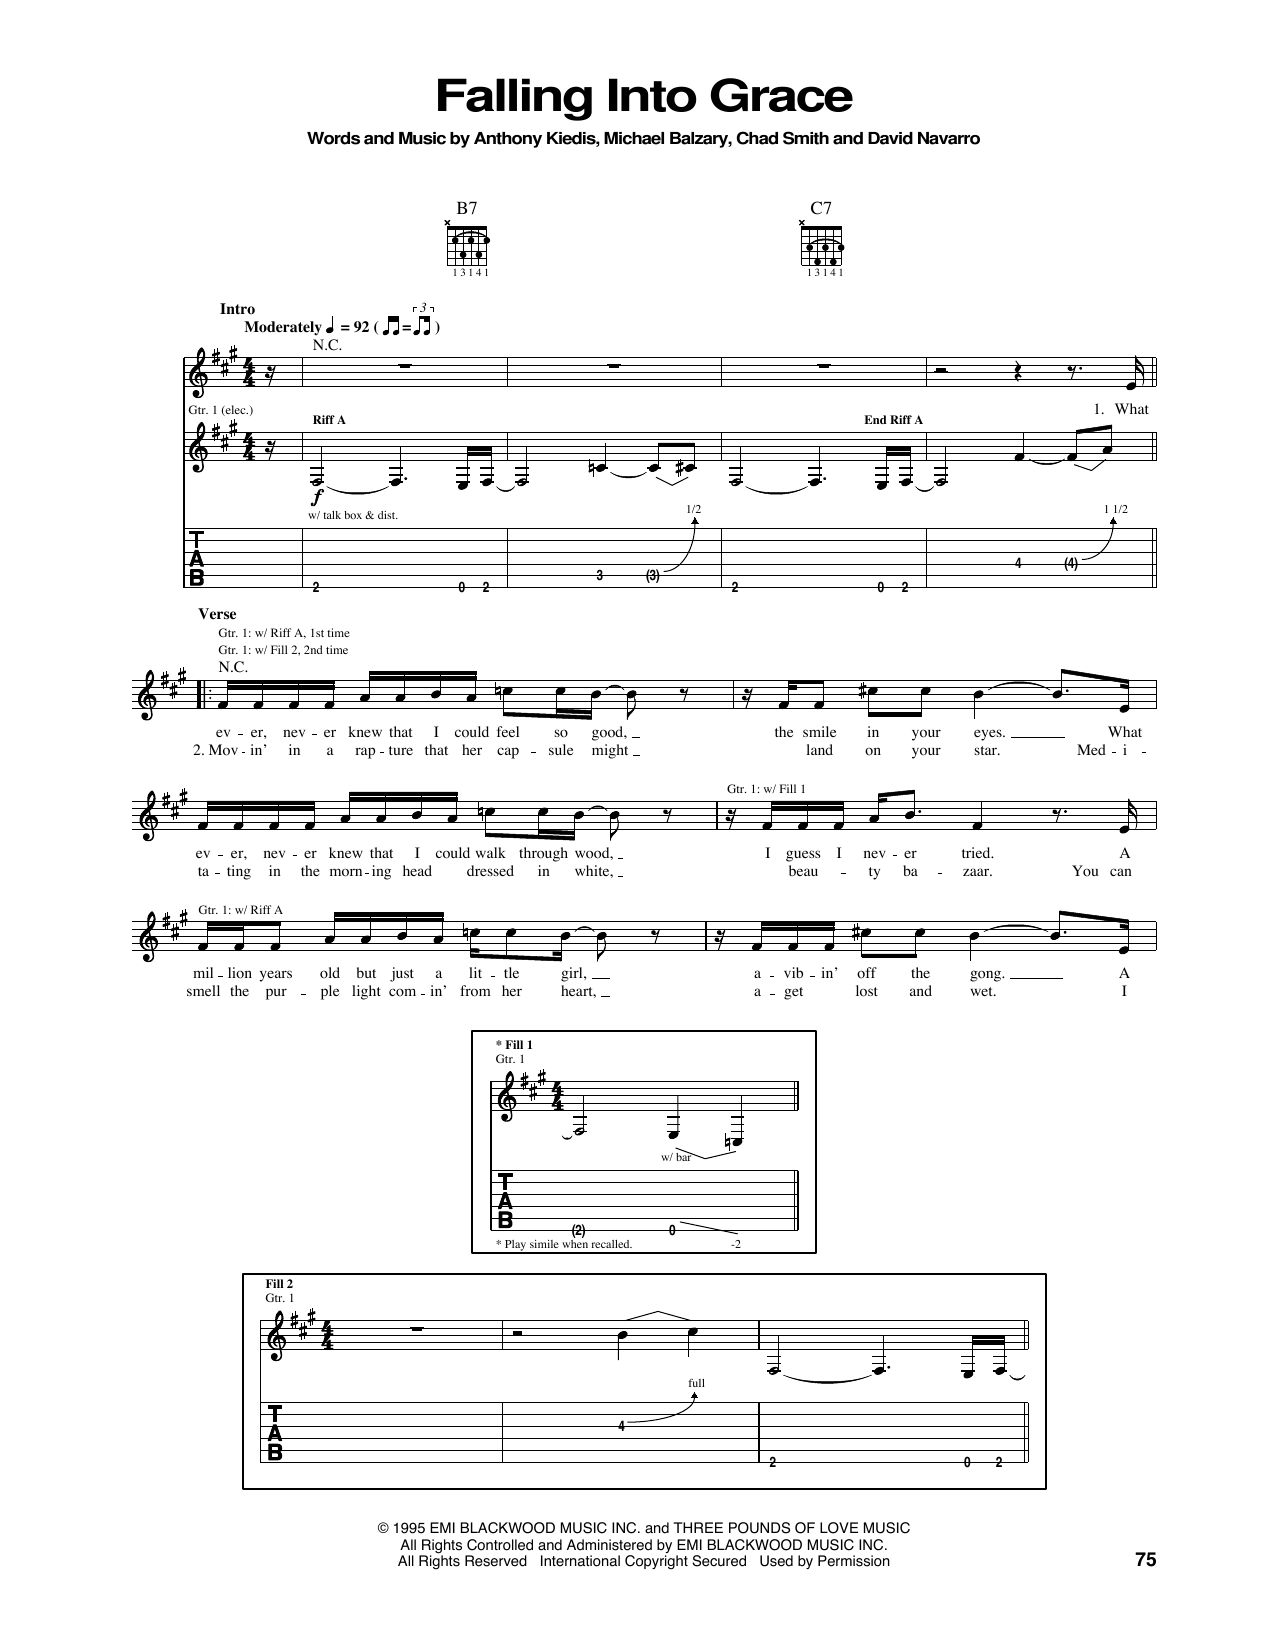 Red Hot Chili Peppers "Falling Grace" Sheet Music PDF Notes, Chords | Alternative Score Guitar Tab Download Printable. SKU: 172021